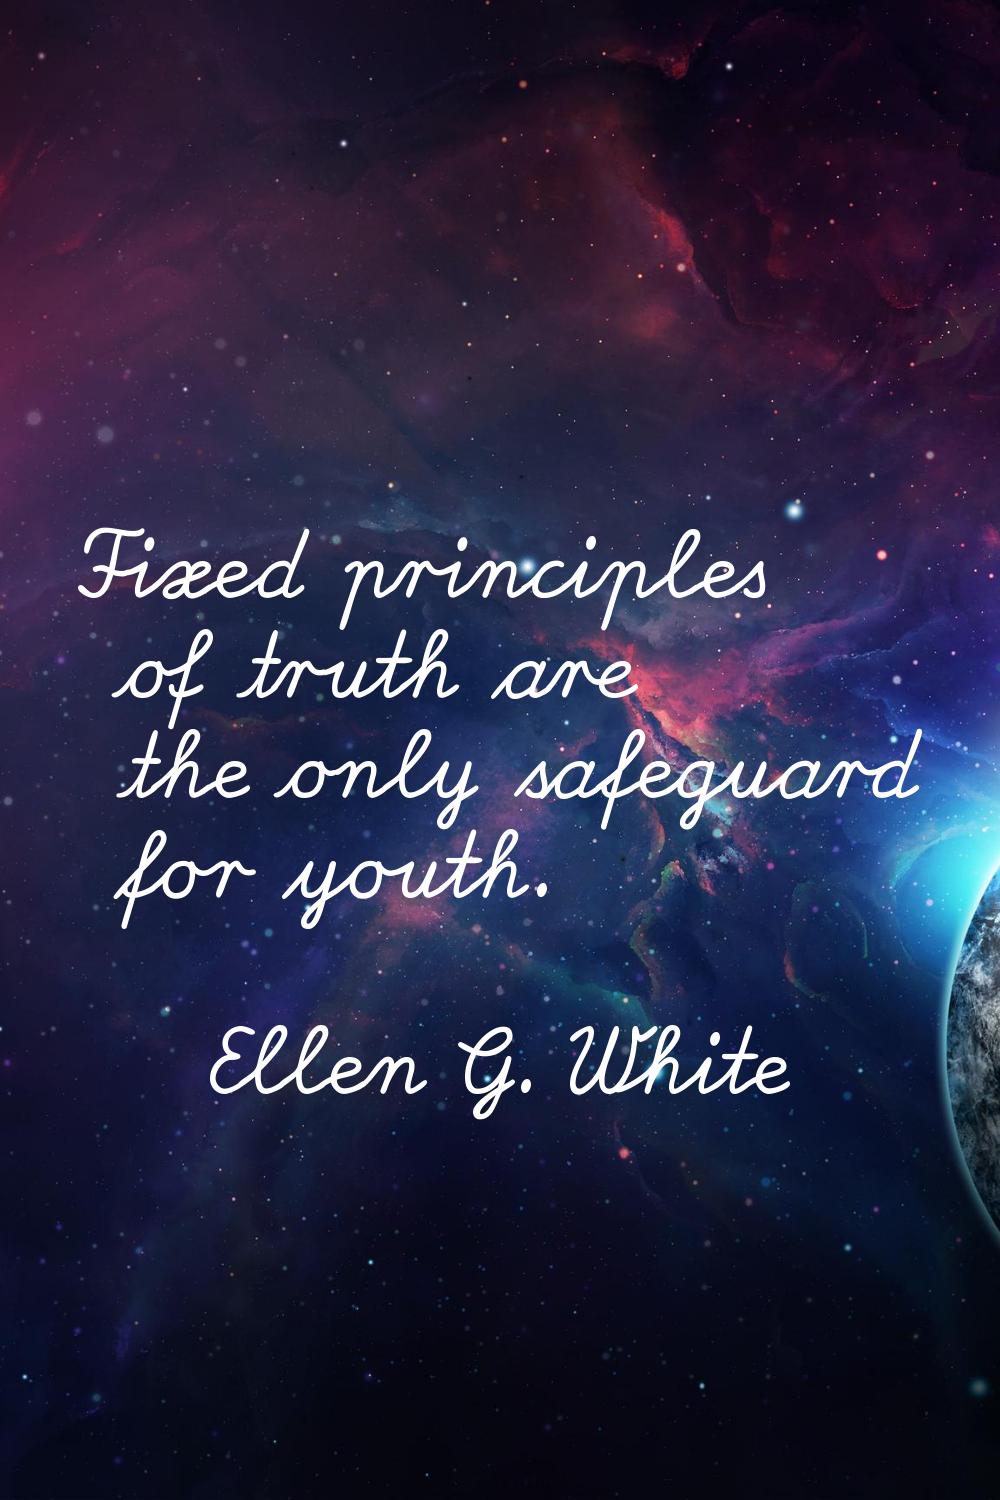 Fixed principles of truth are the only safeguard for youth.